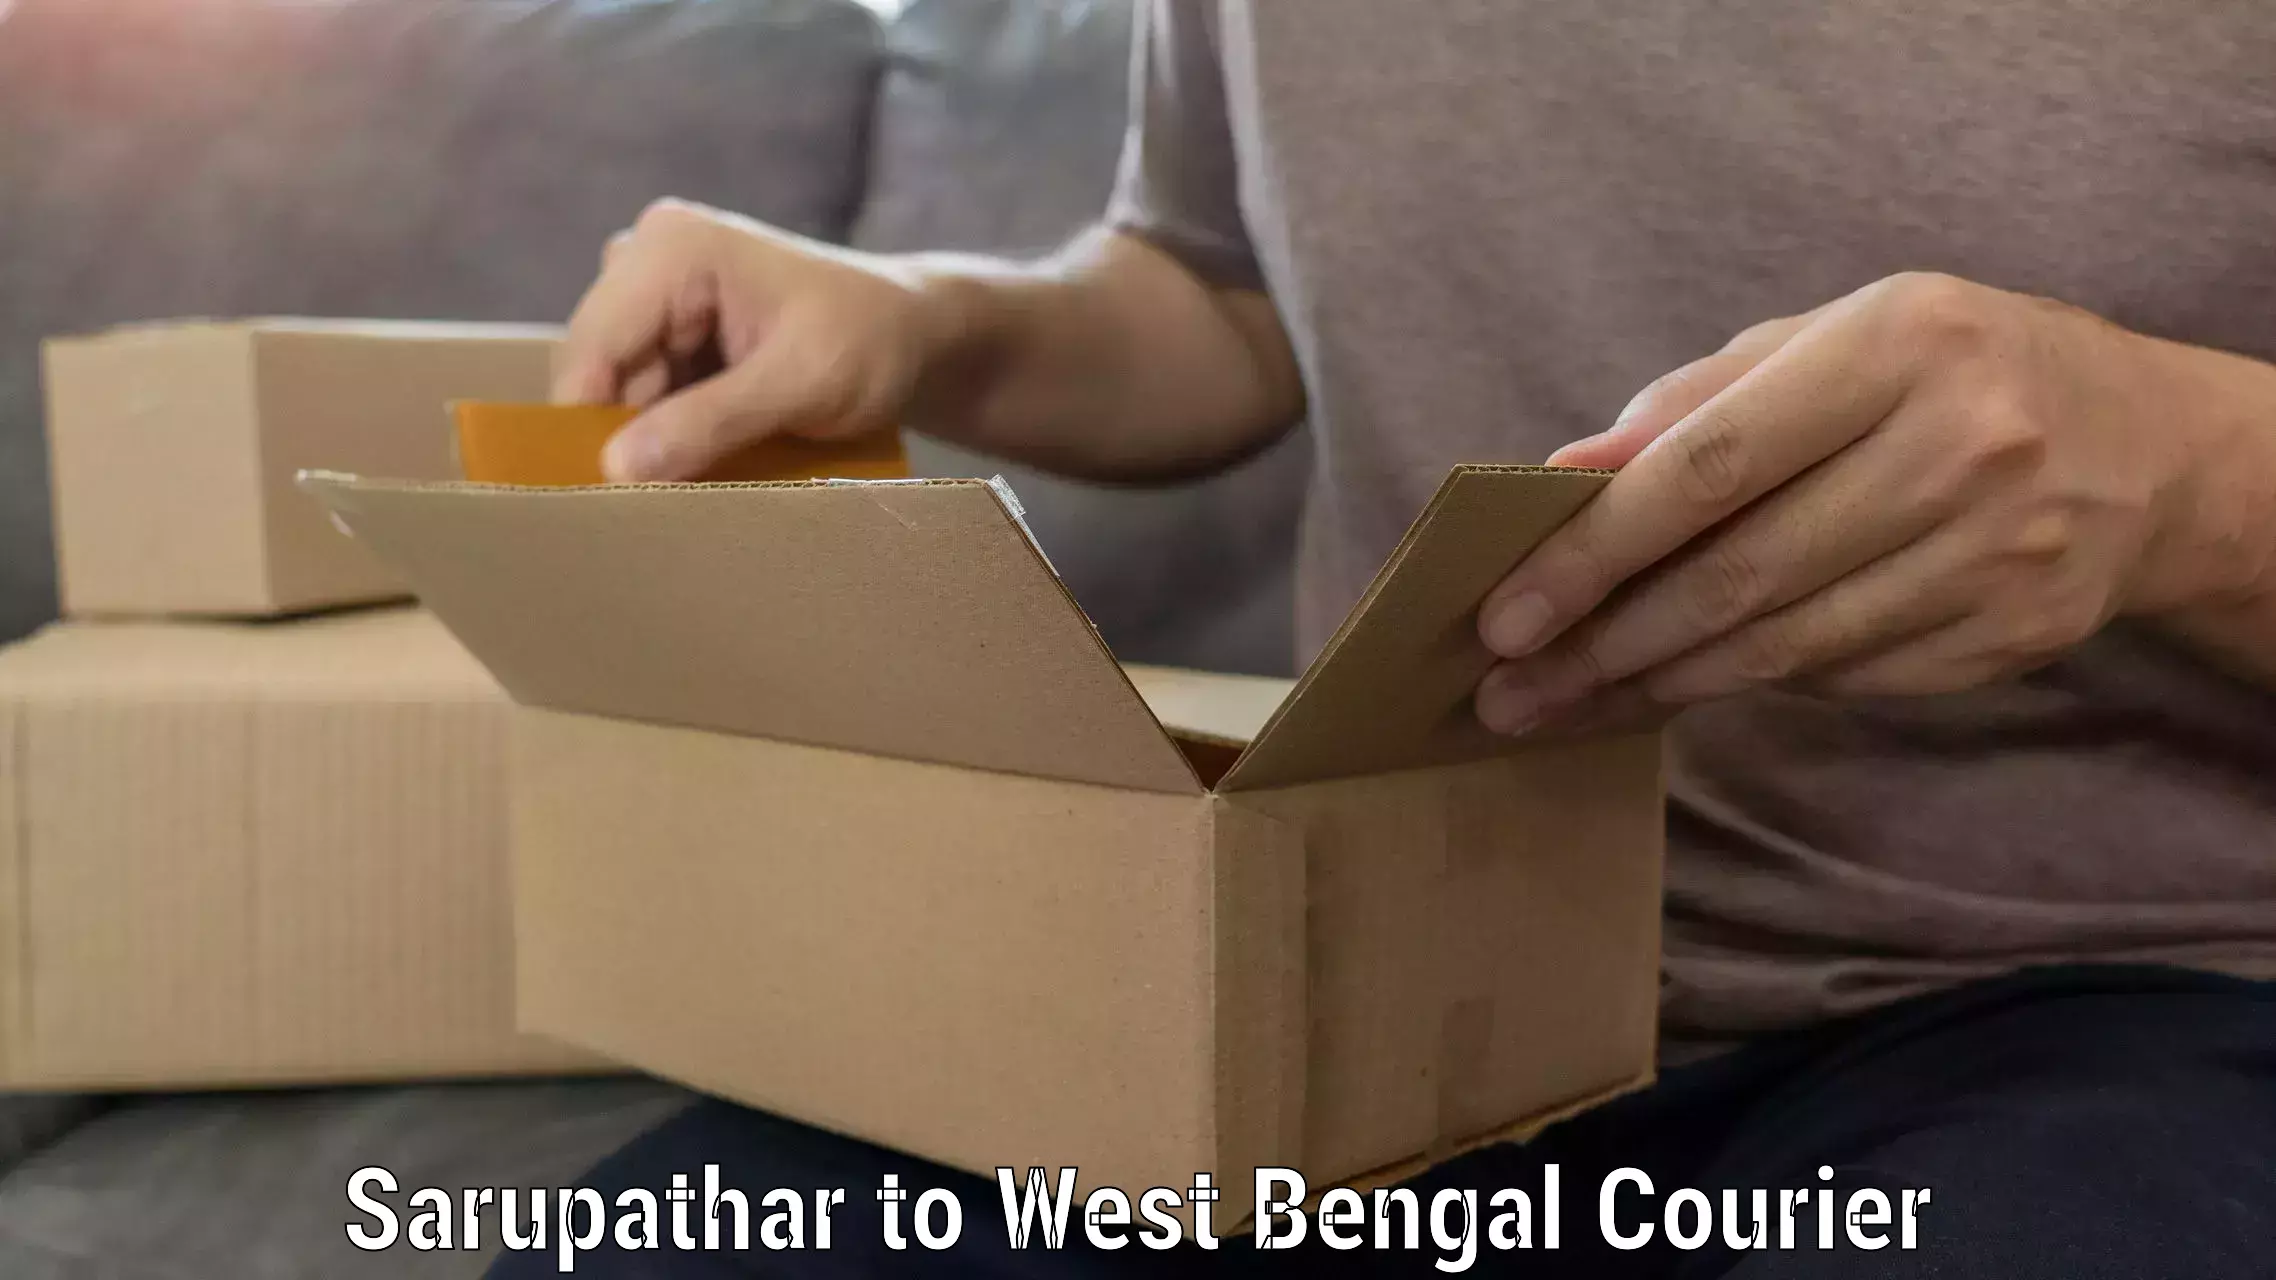 Furniture delivery service Sarupathar to Islampur